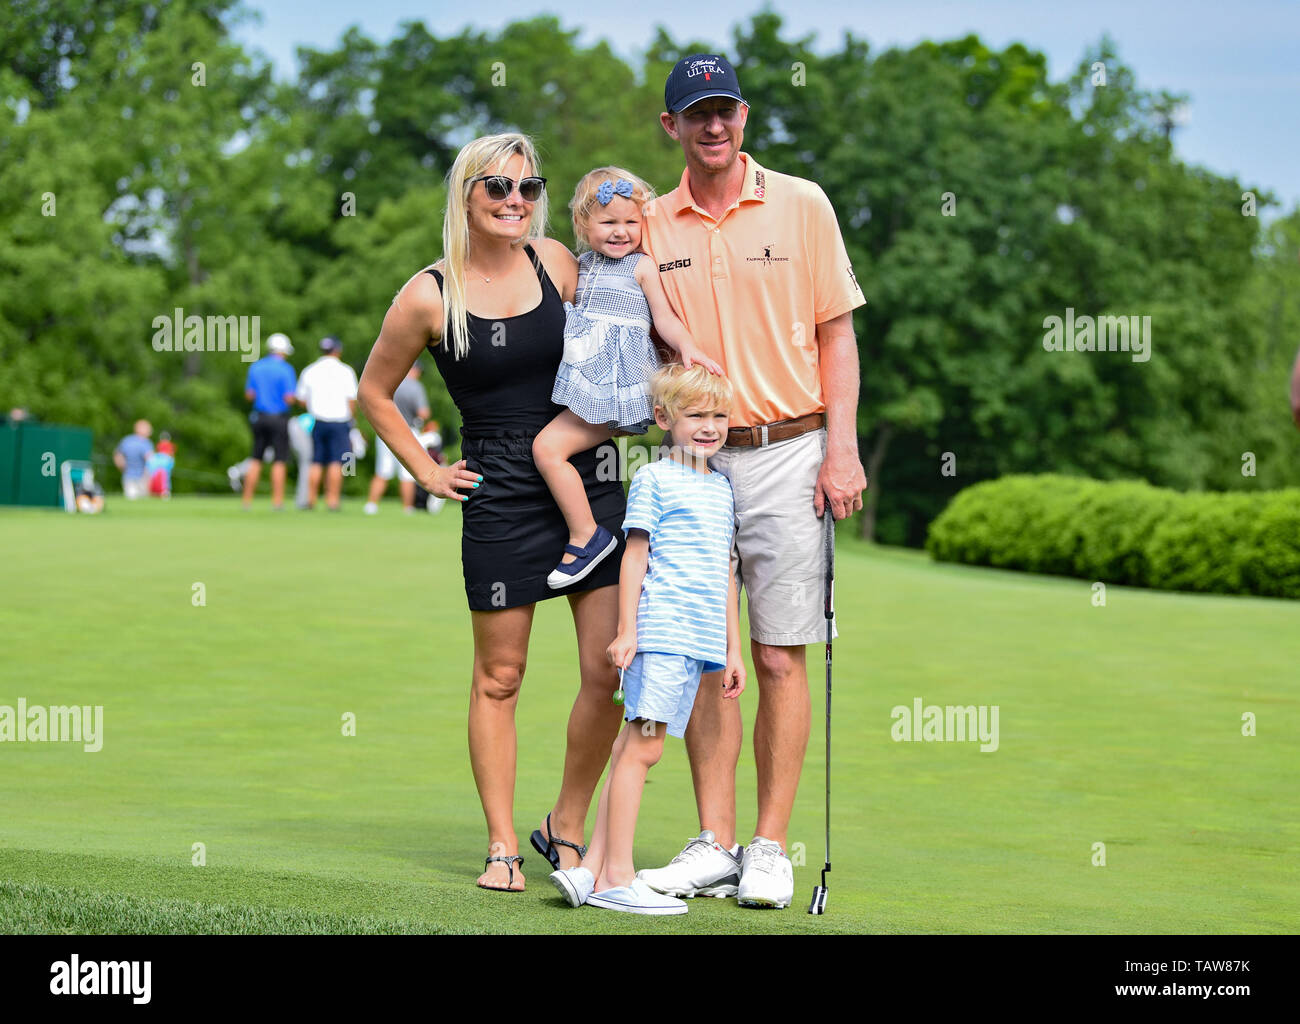 Dublin, OH, USA. 27th May, 2019. Vaughn Taylor poses for a picture with his Wife, Leot, Son, Locklyn, and Daughter, Vanilla during practice round play at the 2019 Memorial Day Tournament presented by Nationwide at Muirfield Village Golf Club in Dublin, OH. Austyn McFadden/CSM/Alamy Live News Stock Photo